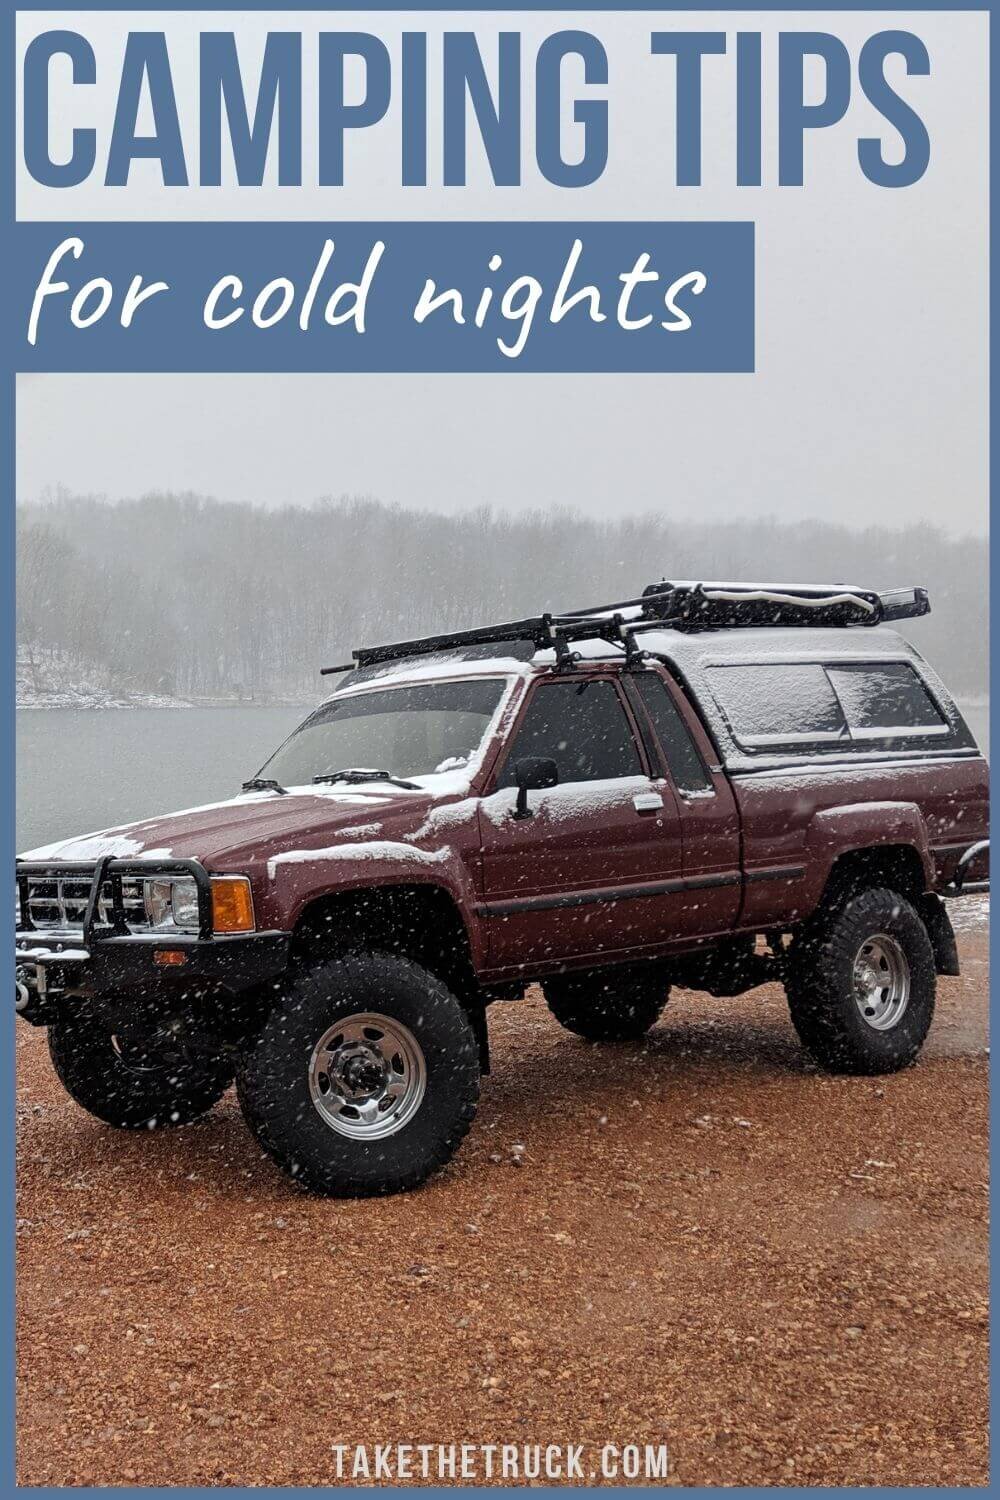 Winter truck camping doesn’t have to be uncomfortable! This post is full of ideas and tips to help you stay warm and comfortable when doing some cold weather truck camping.